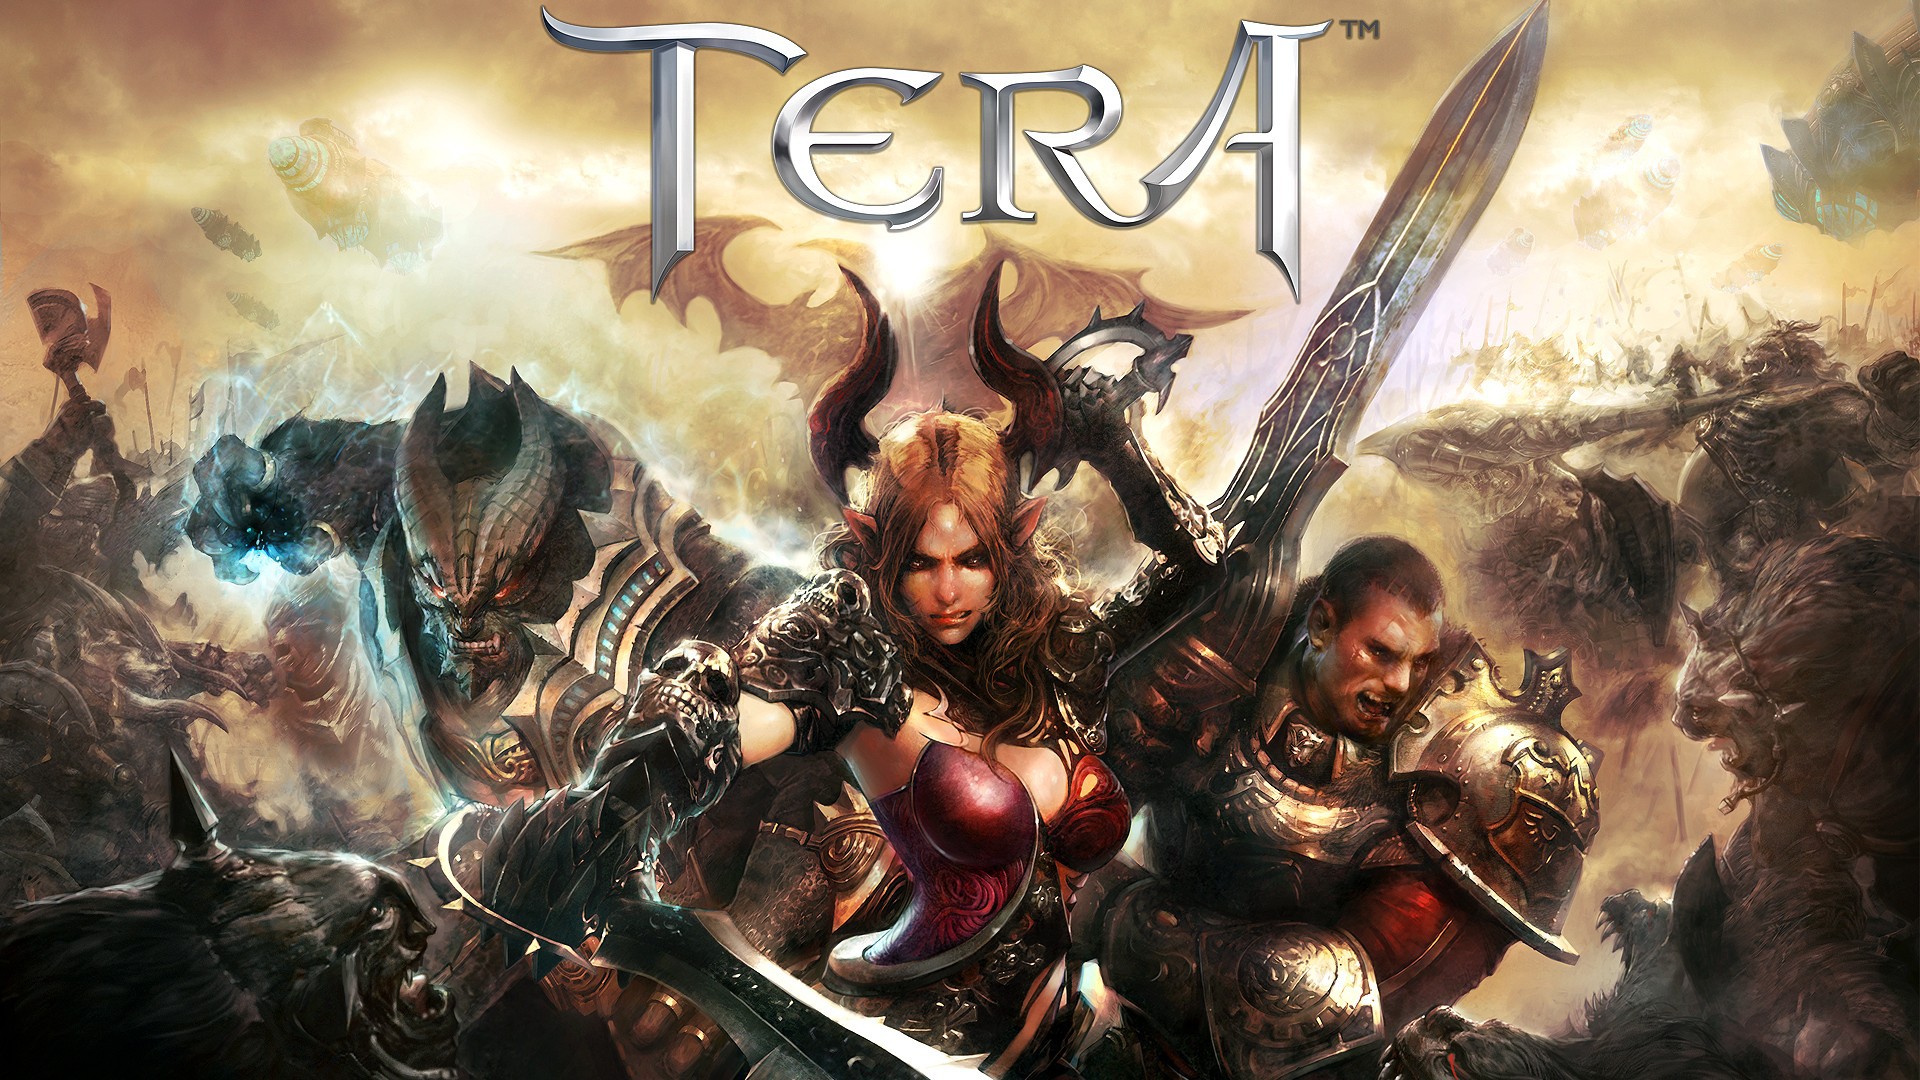 Poster Tera Online Games wallpapers and images - wallpapers, pictures